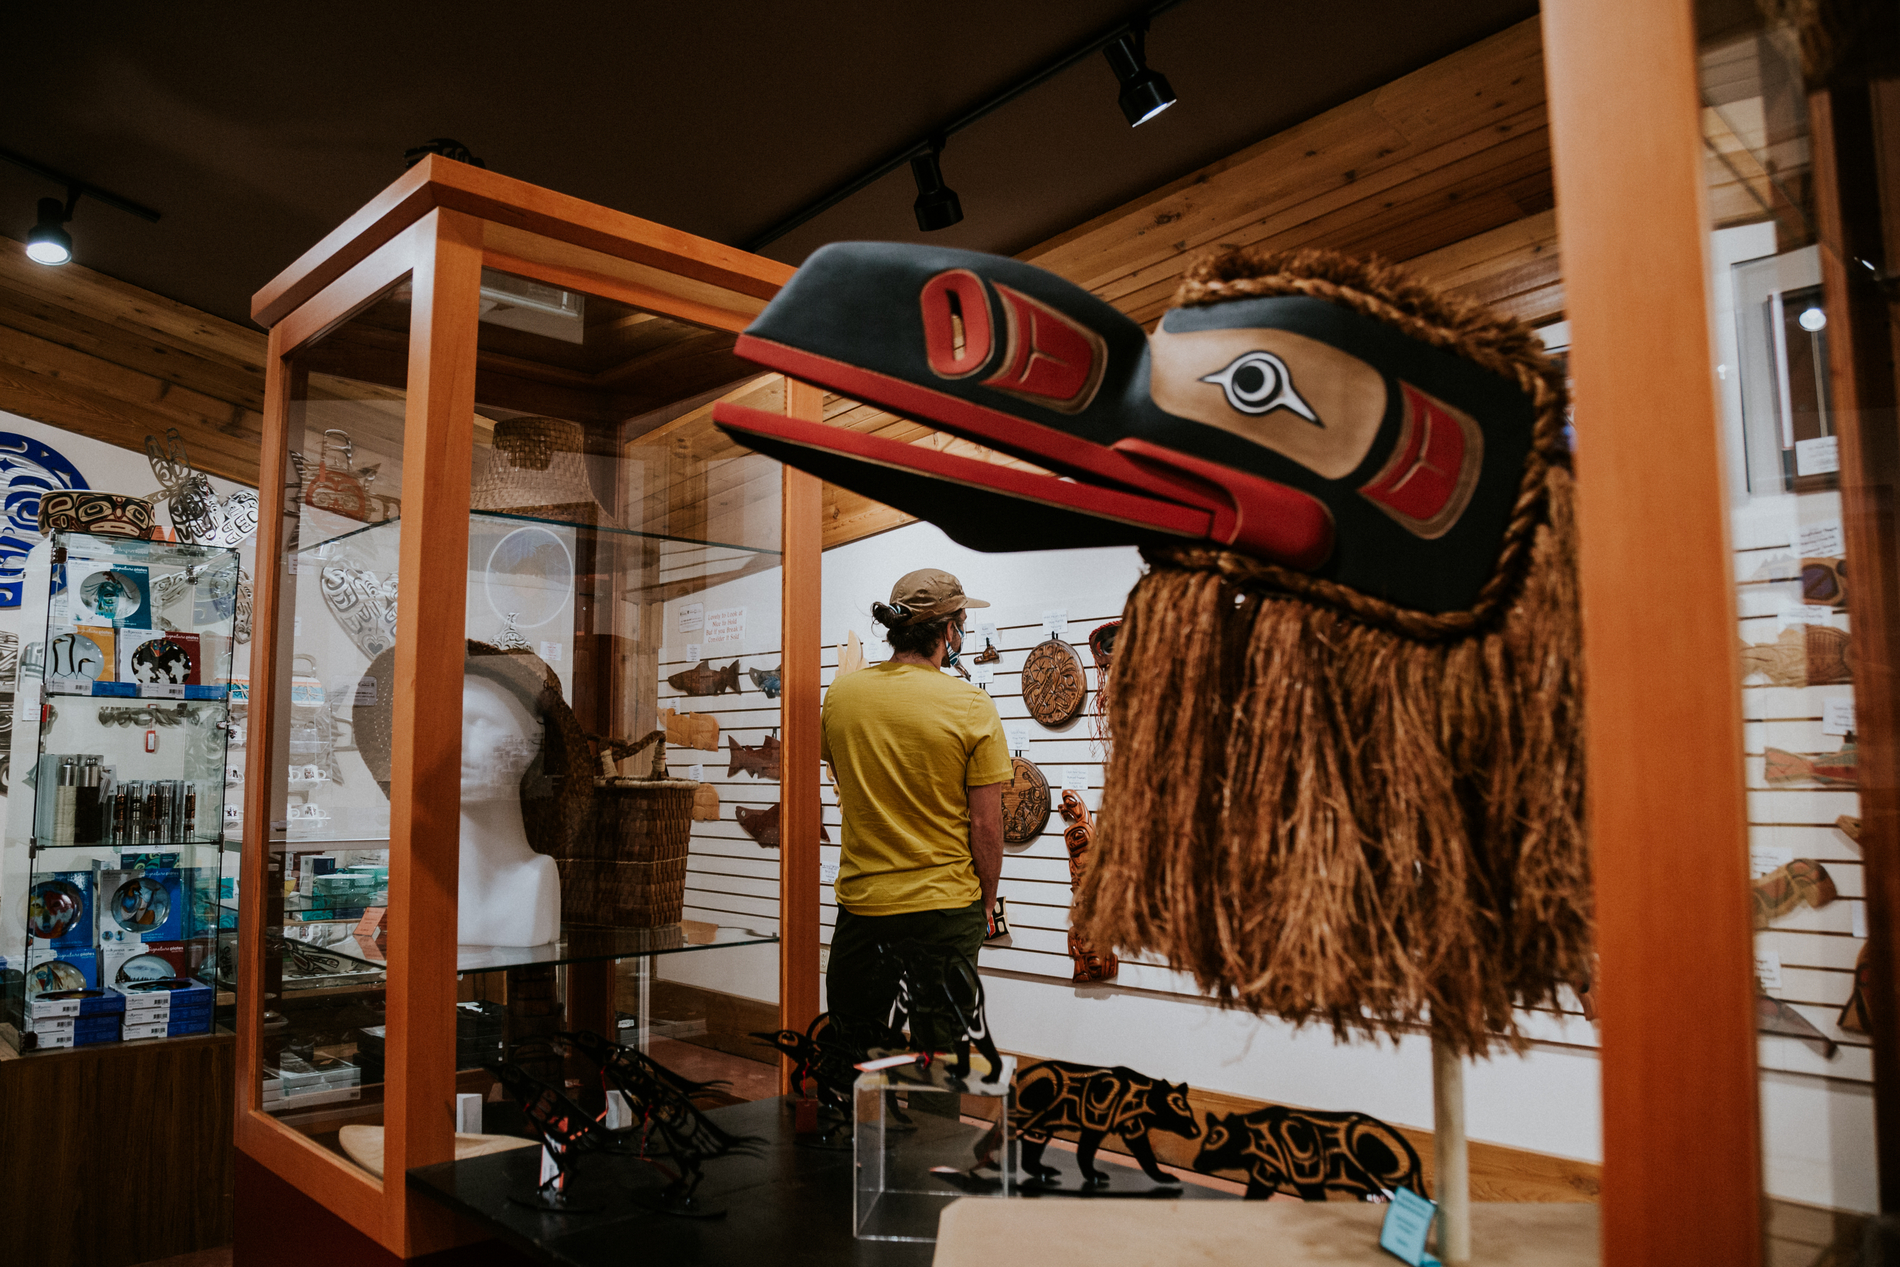 A collection of Indigenous art in glass cases and on the walls. A man examines a piece on the wall in the background.